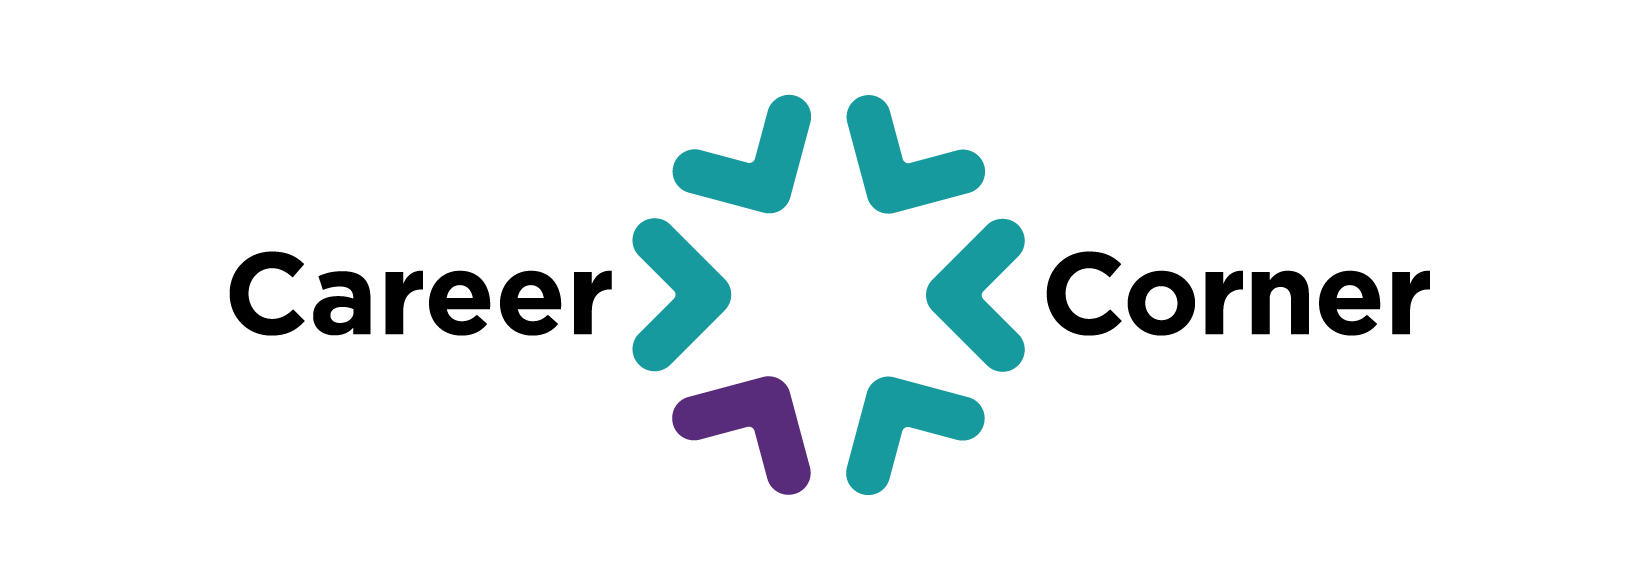 Teal and purple logo of the Federation’s Career Corner event series, with text reading “Career Corner”.  